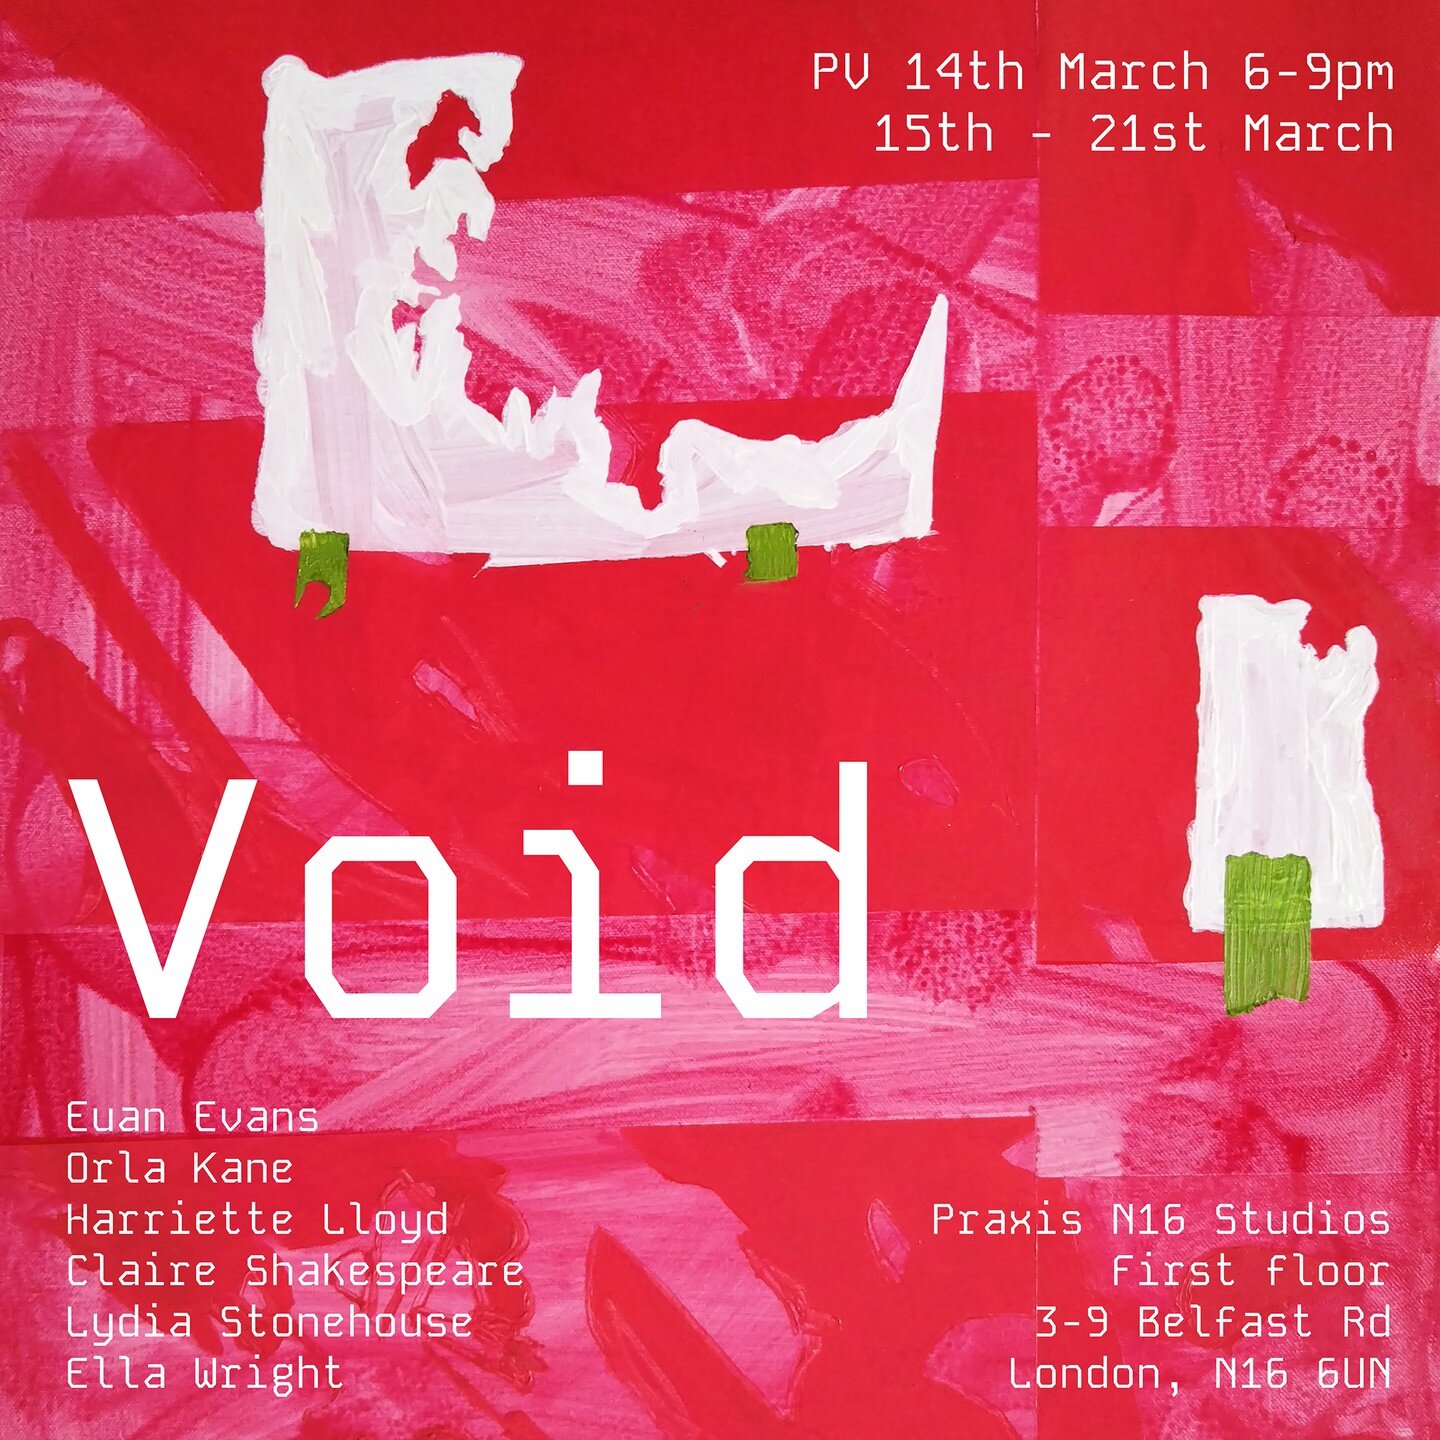 We are pleased to announce 'Void&rsquo;, a group exhibition curated by @claireshakespeare_ and @euan_evans_ will be open @praxis_n16 15th &ndash; 21st March.

PV - Thursday 14th March 6 - 9 pm
Saturday 16th &amp; Sunday 17th 11am - 6pm
15th, 18th &nd